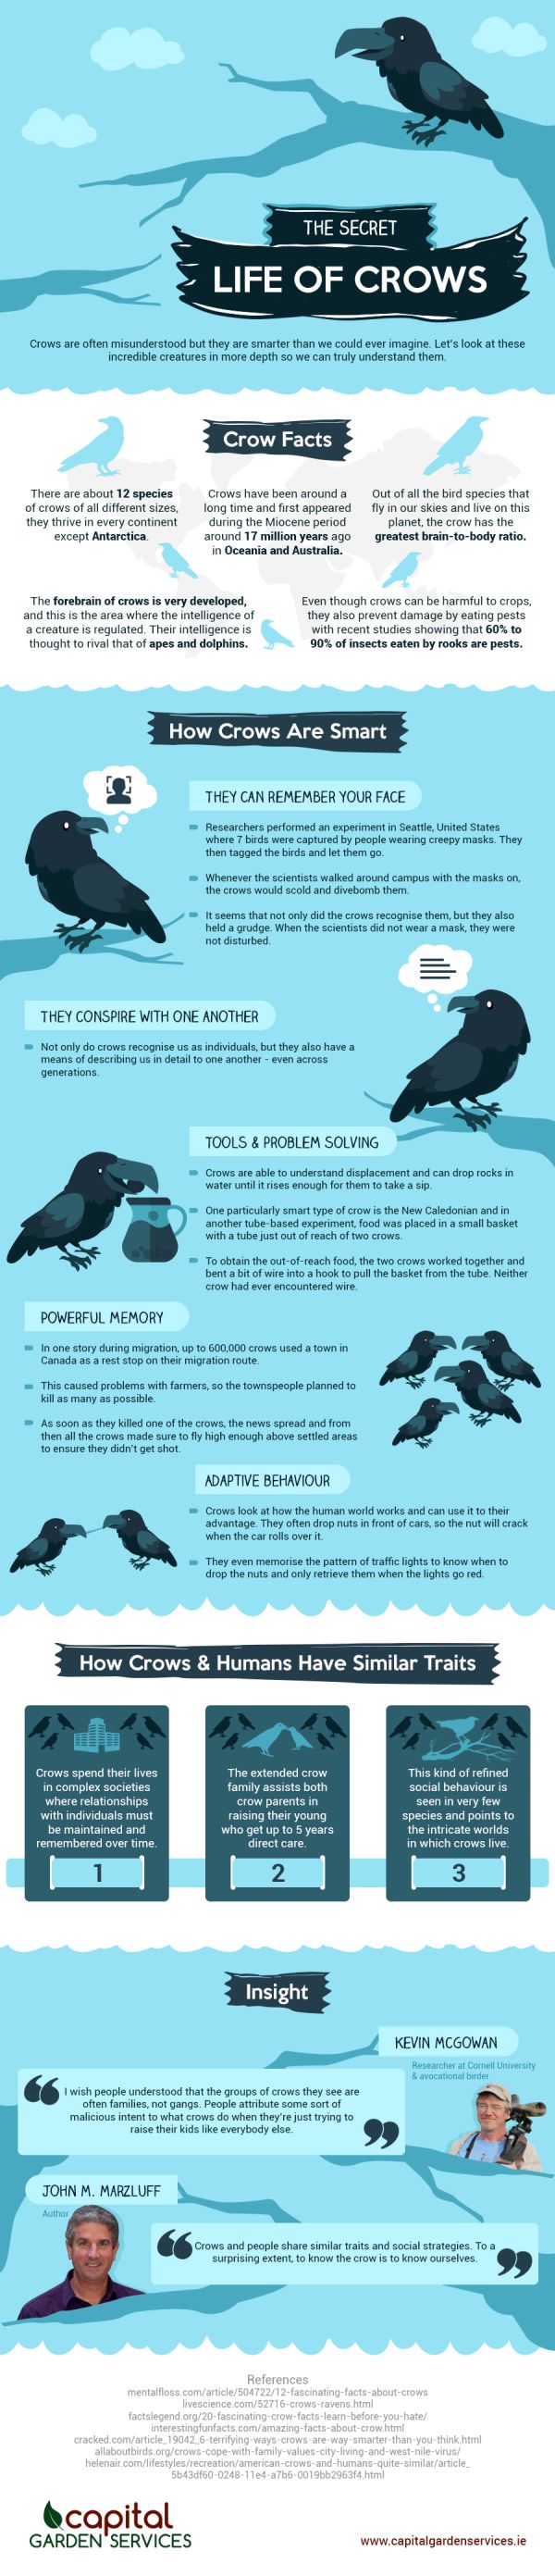 The Secret Life of Crows: an Infographic